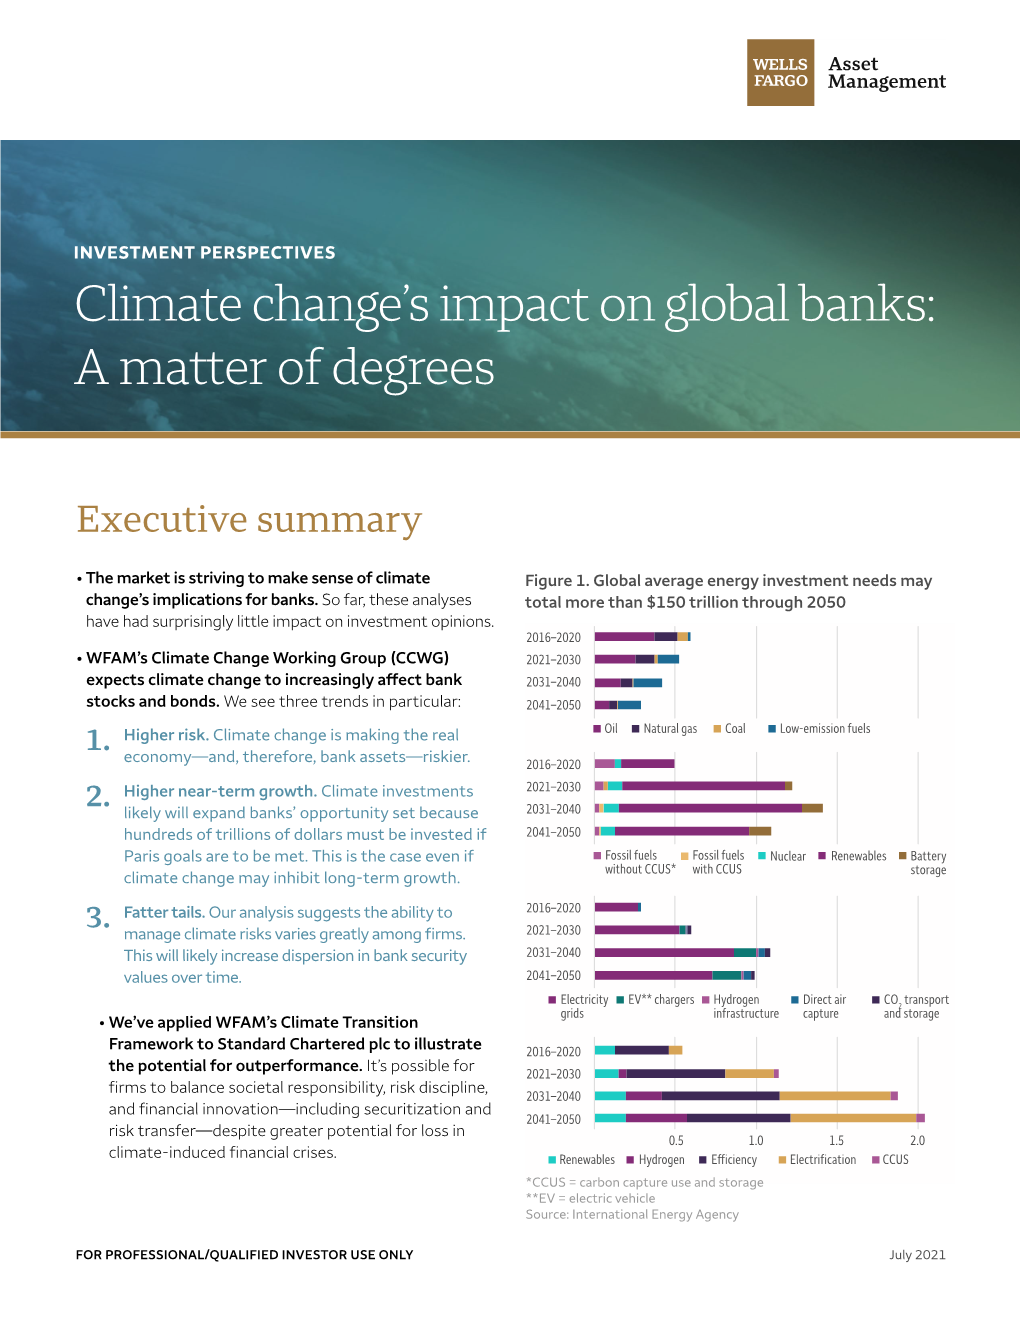 Climate Change's Impact on Global Banks: a Matter of Degrees